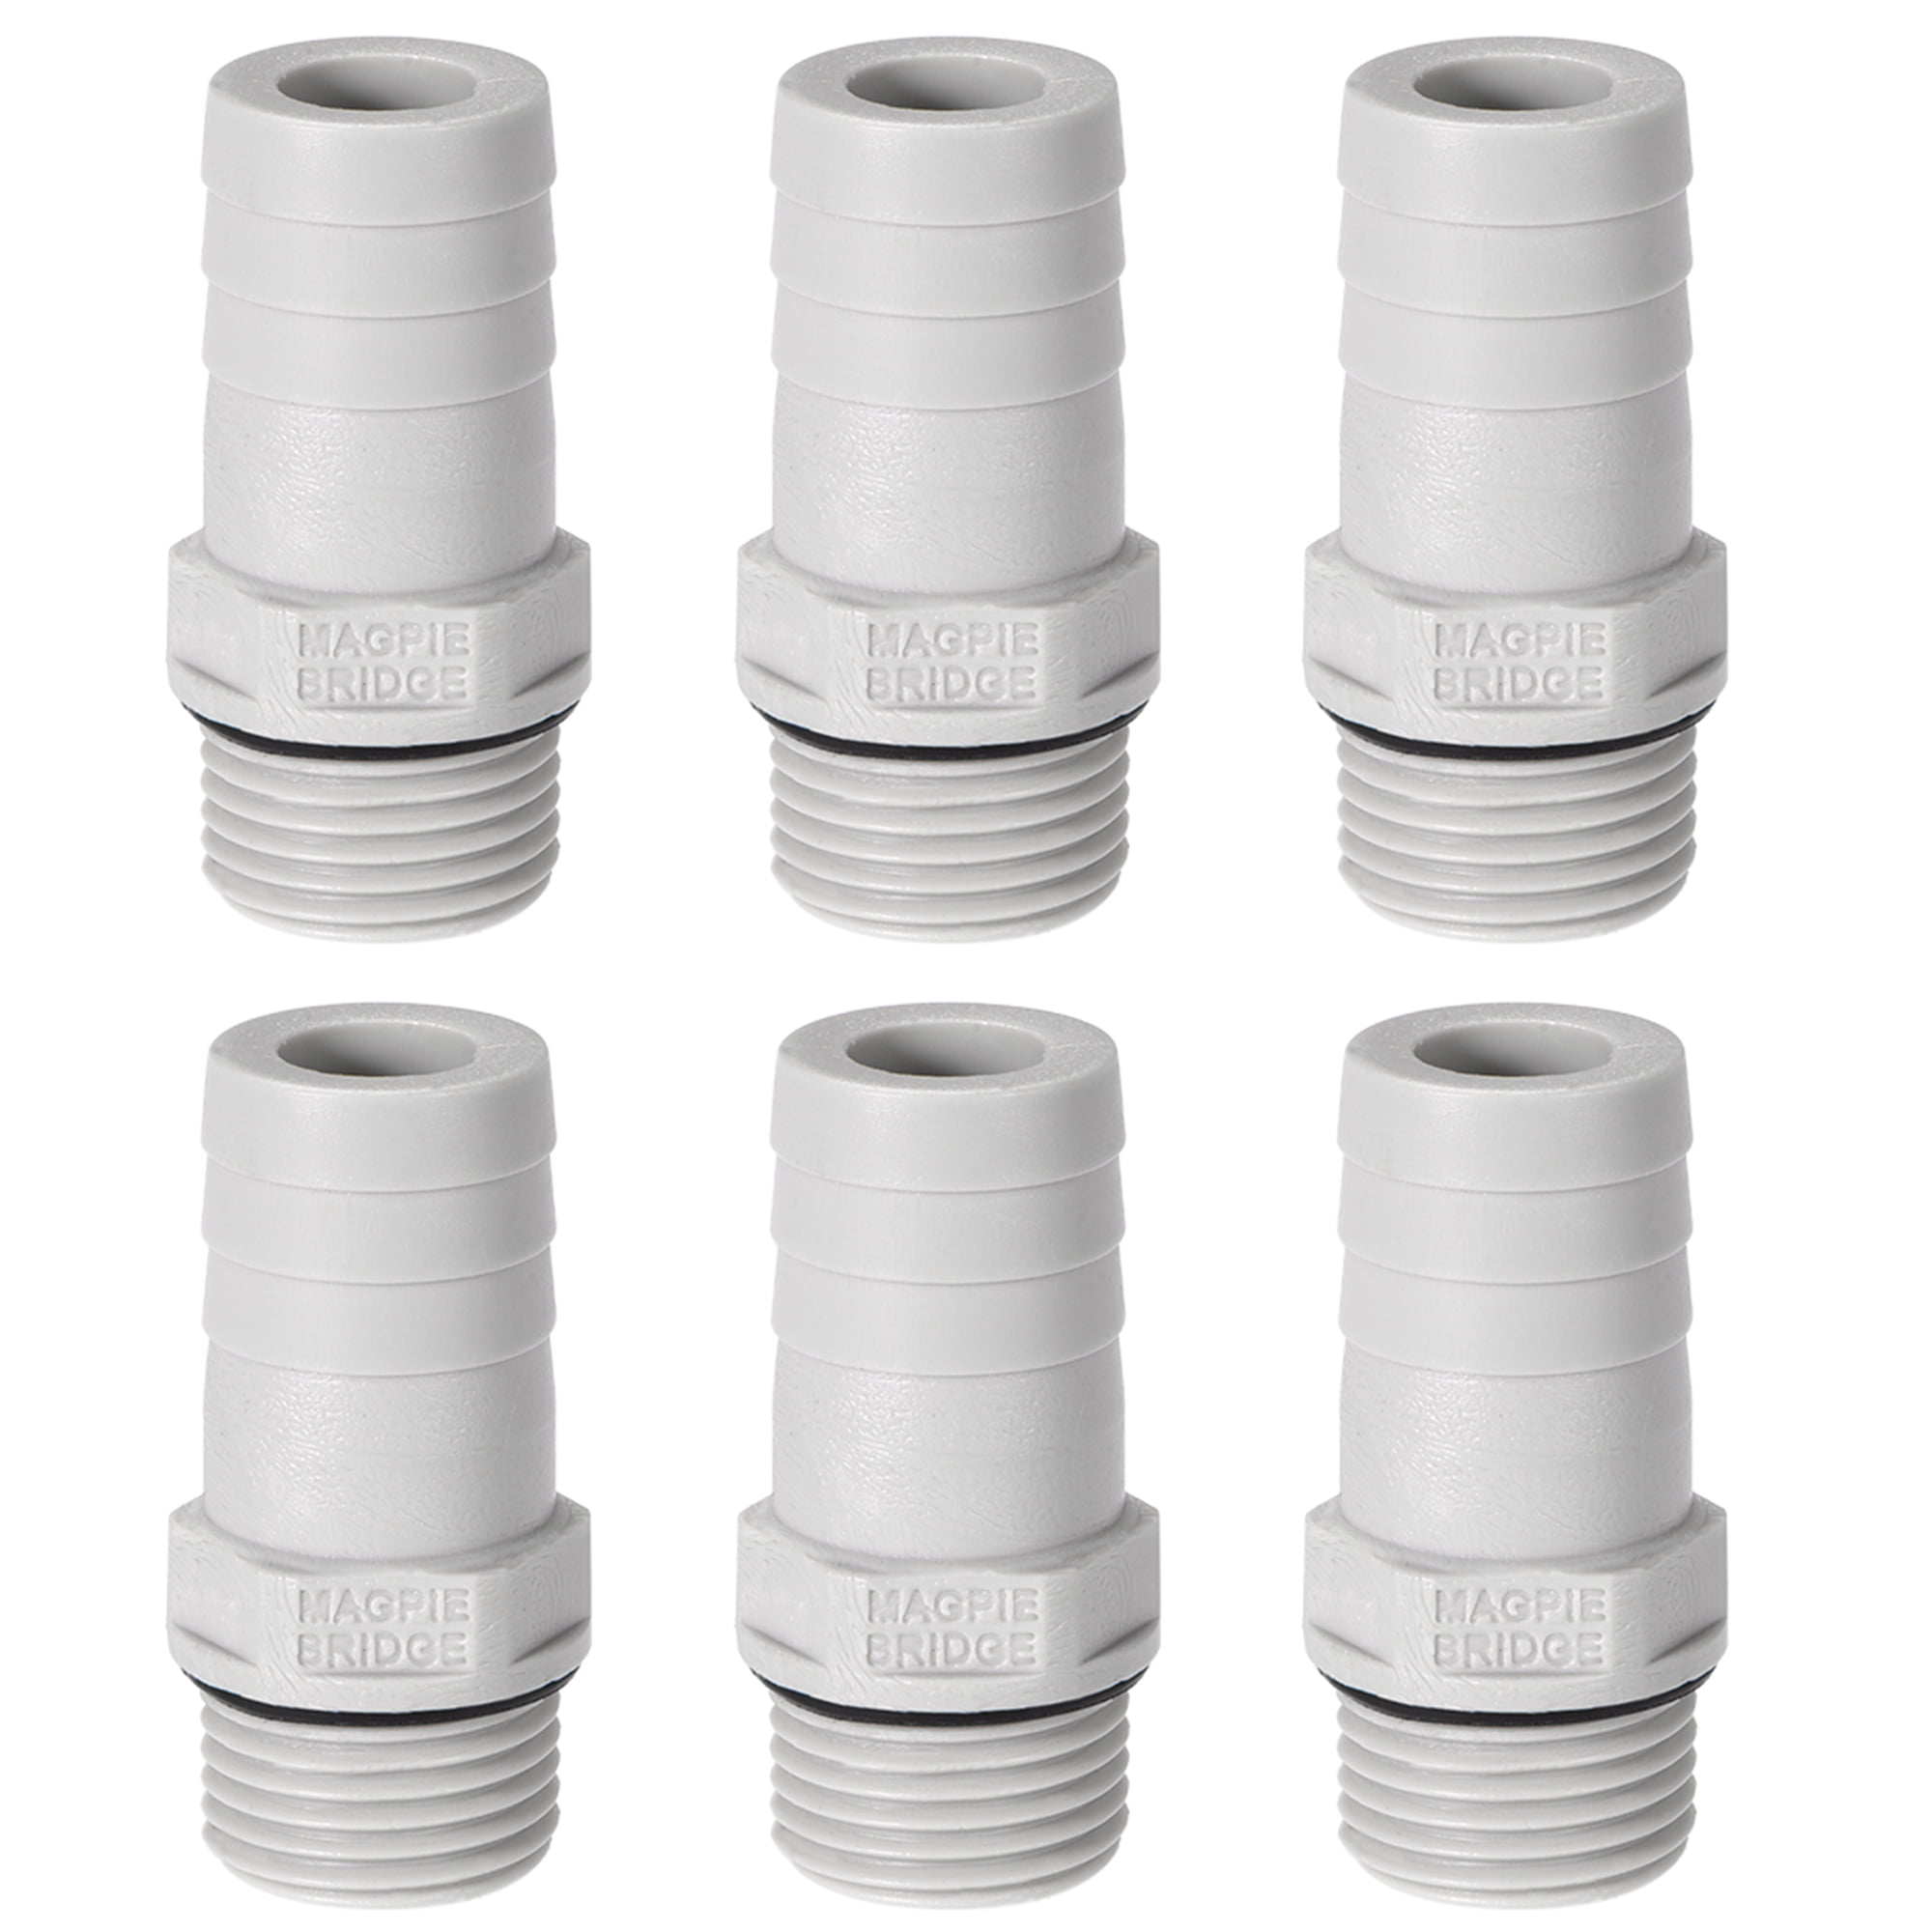 uxcell PVC Barb Hose Fitting Connector Adapter 8mm or 5/16 Barbed x 1/2 G Male Pipe 6pcs 